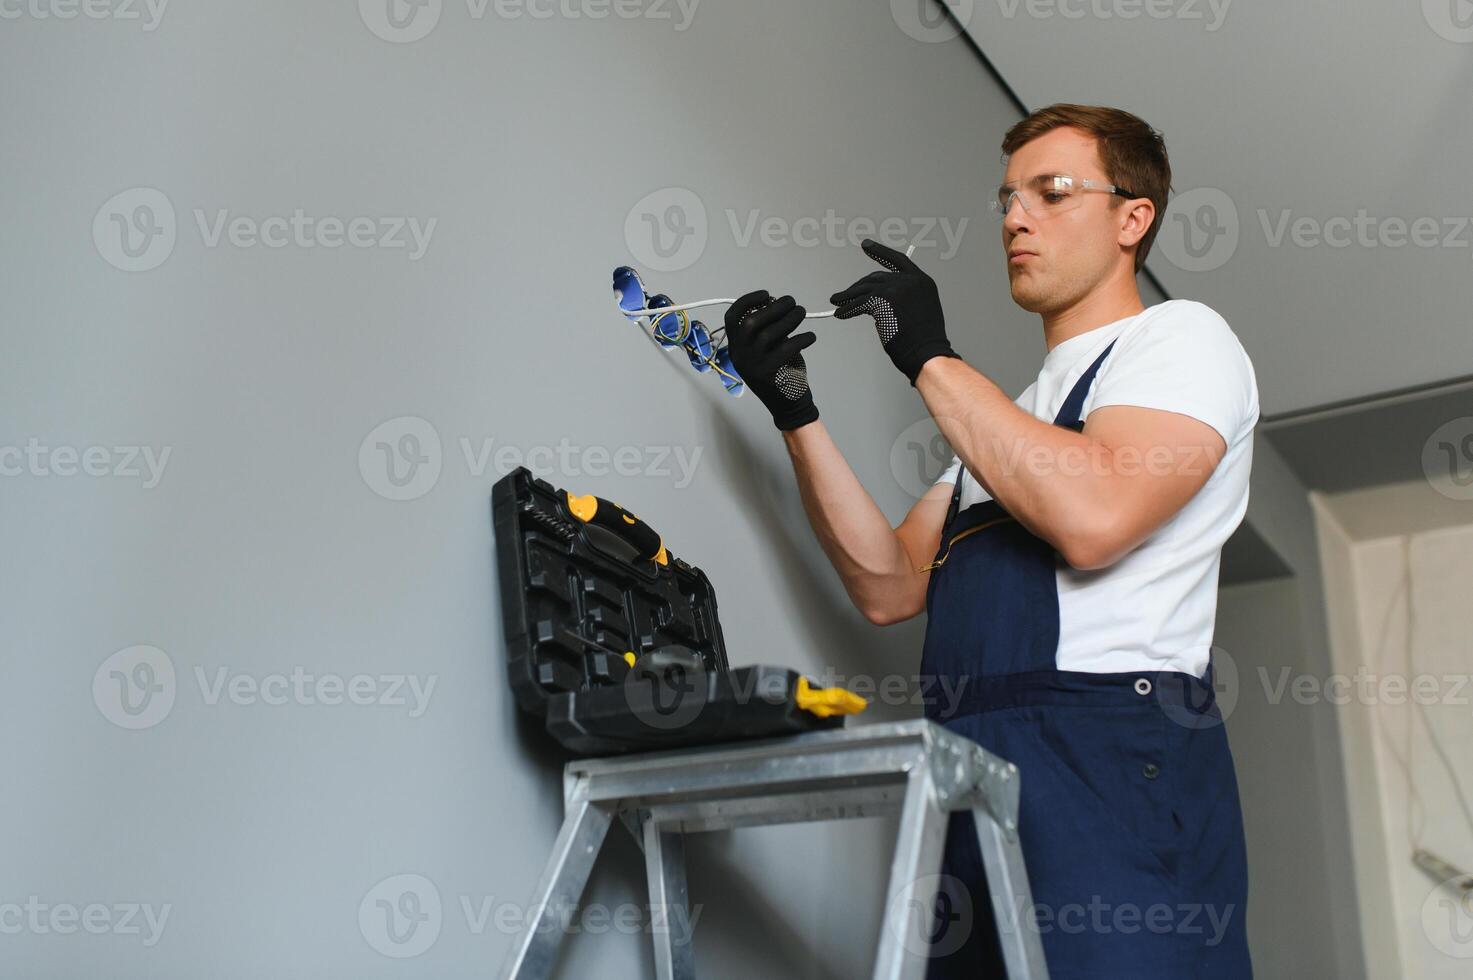 Electrician with screwdriver repairing power socket in room photo